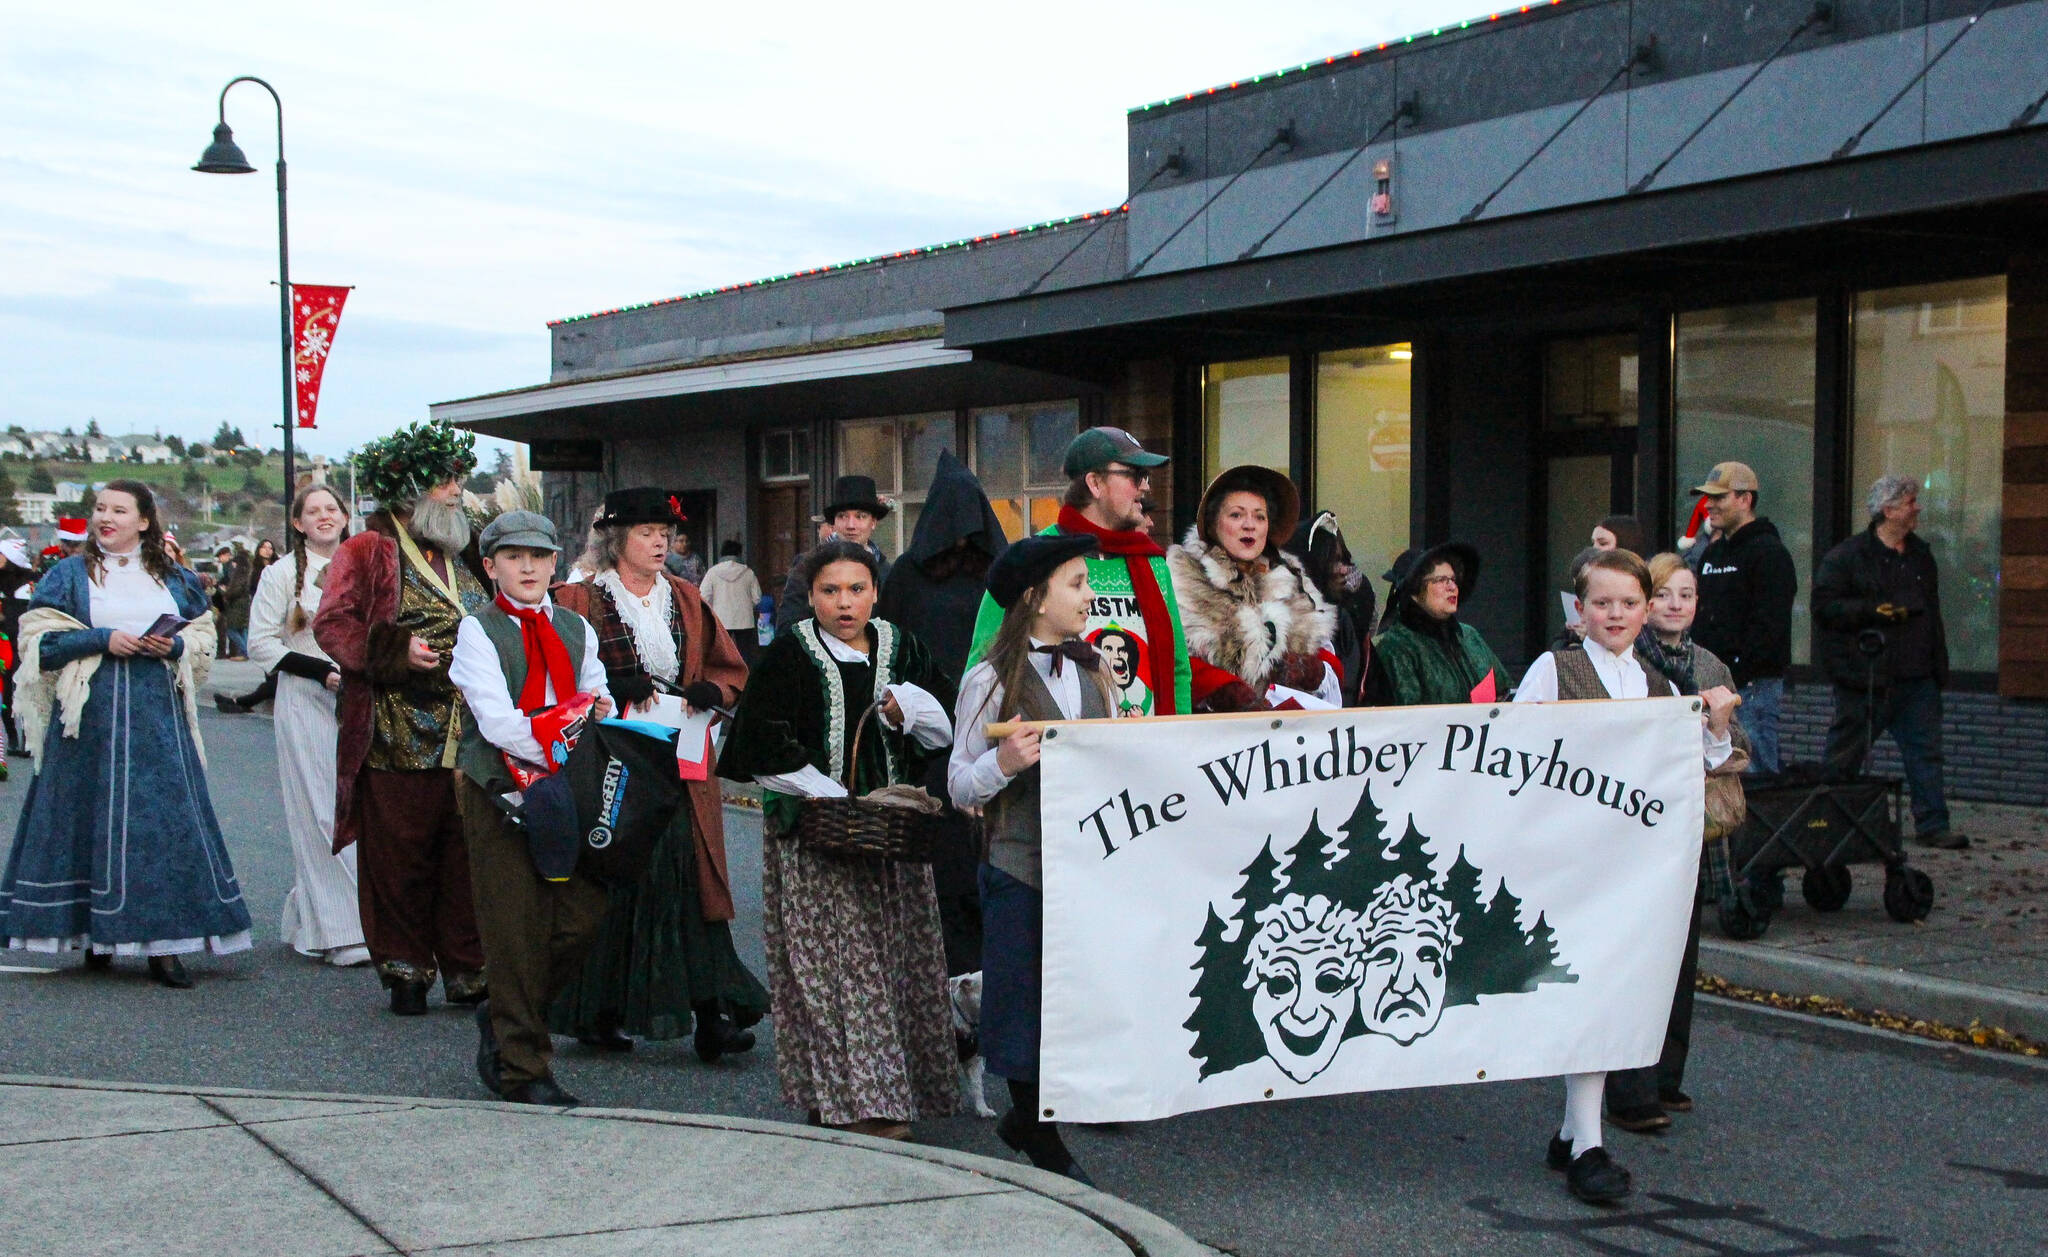 The Whidbey Playhouse joined Santa’s parade as characters from “A Christmas Carol.” (Photo by Luisa Loi)